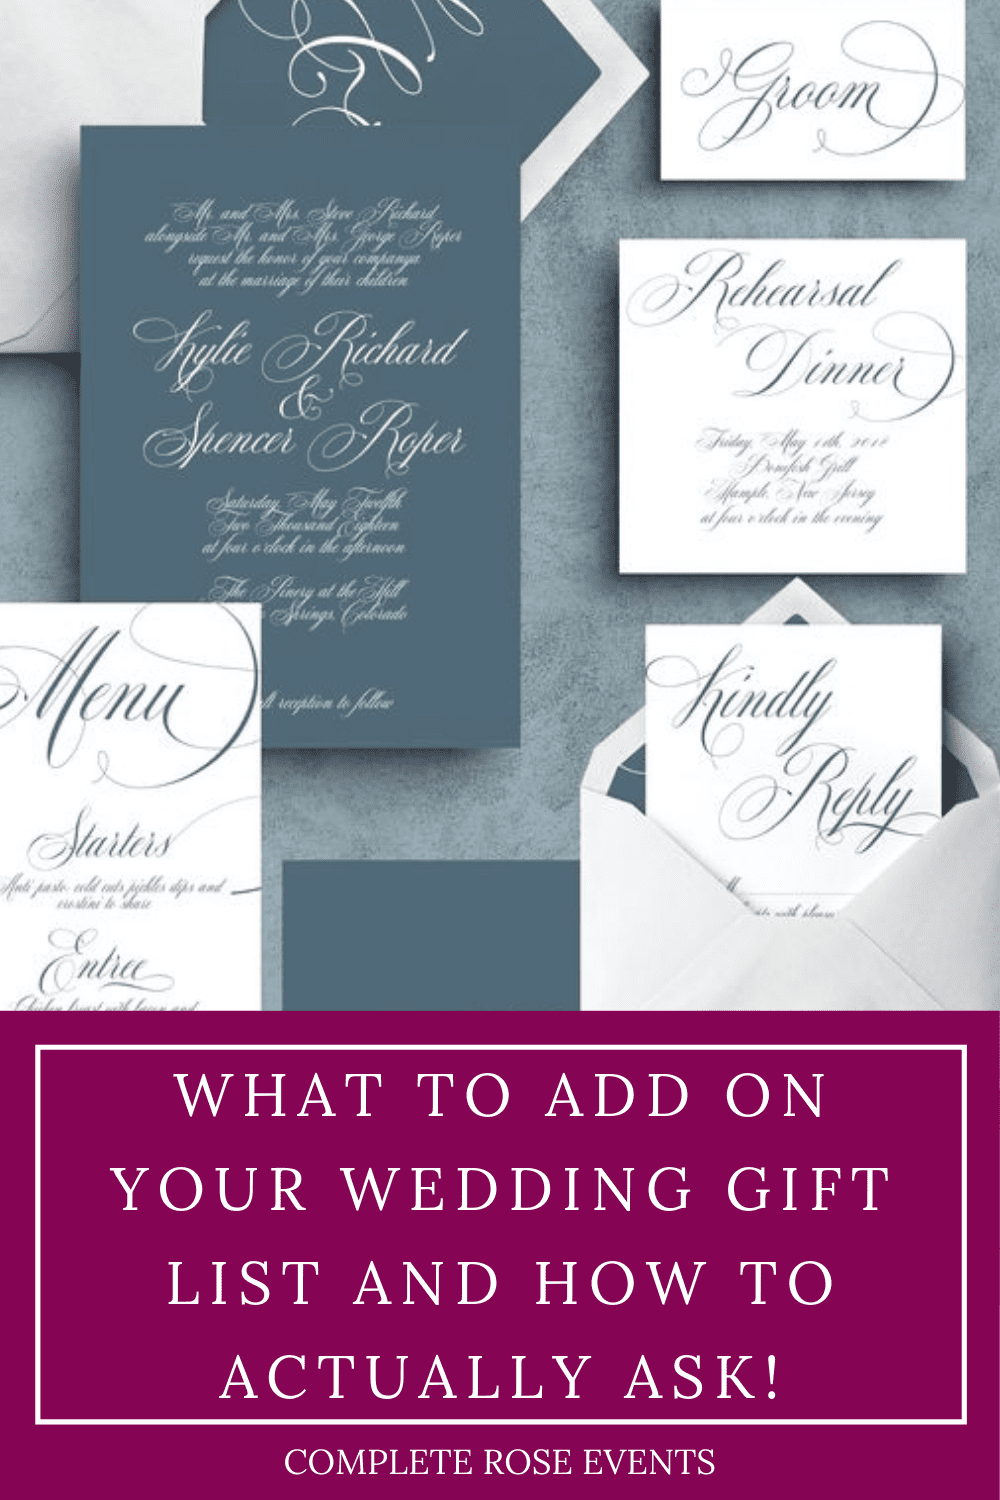 What to add on your Wedding gift list and how to actually ask!